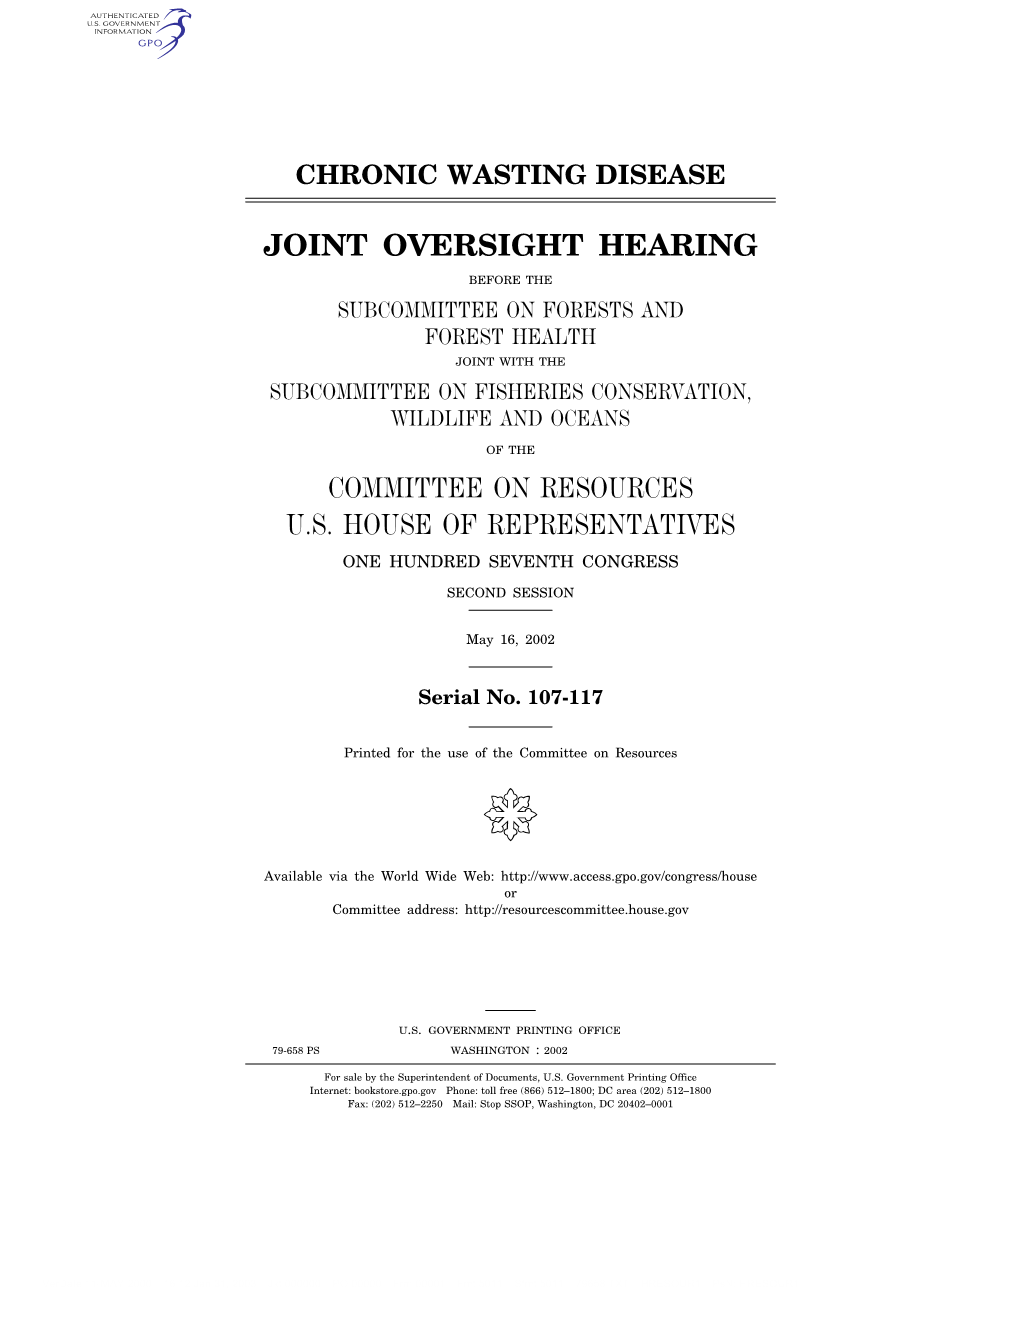 Chronic Wasting Disease Joint Oversight Hearing